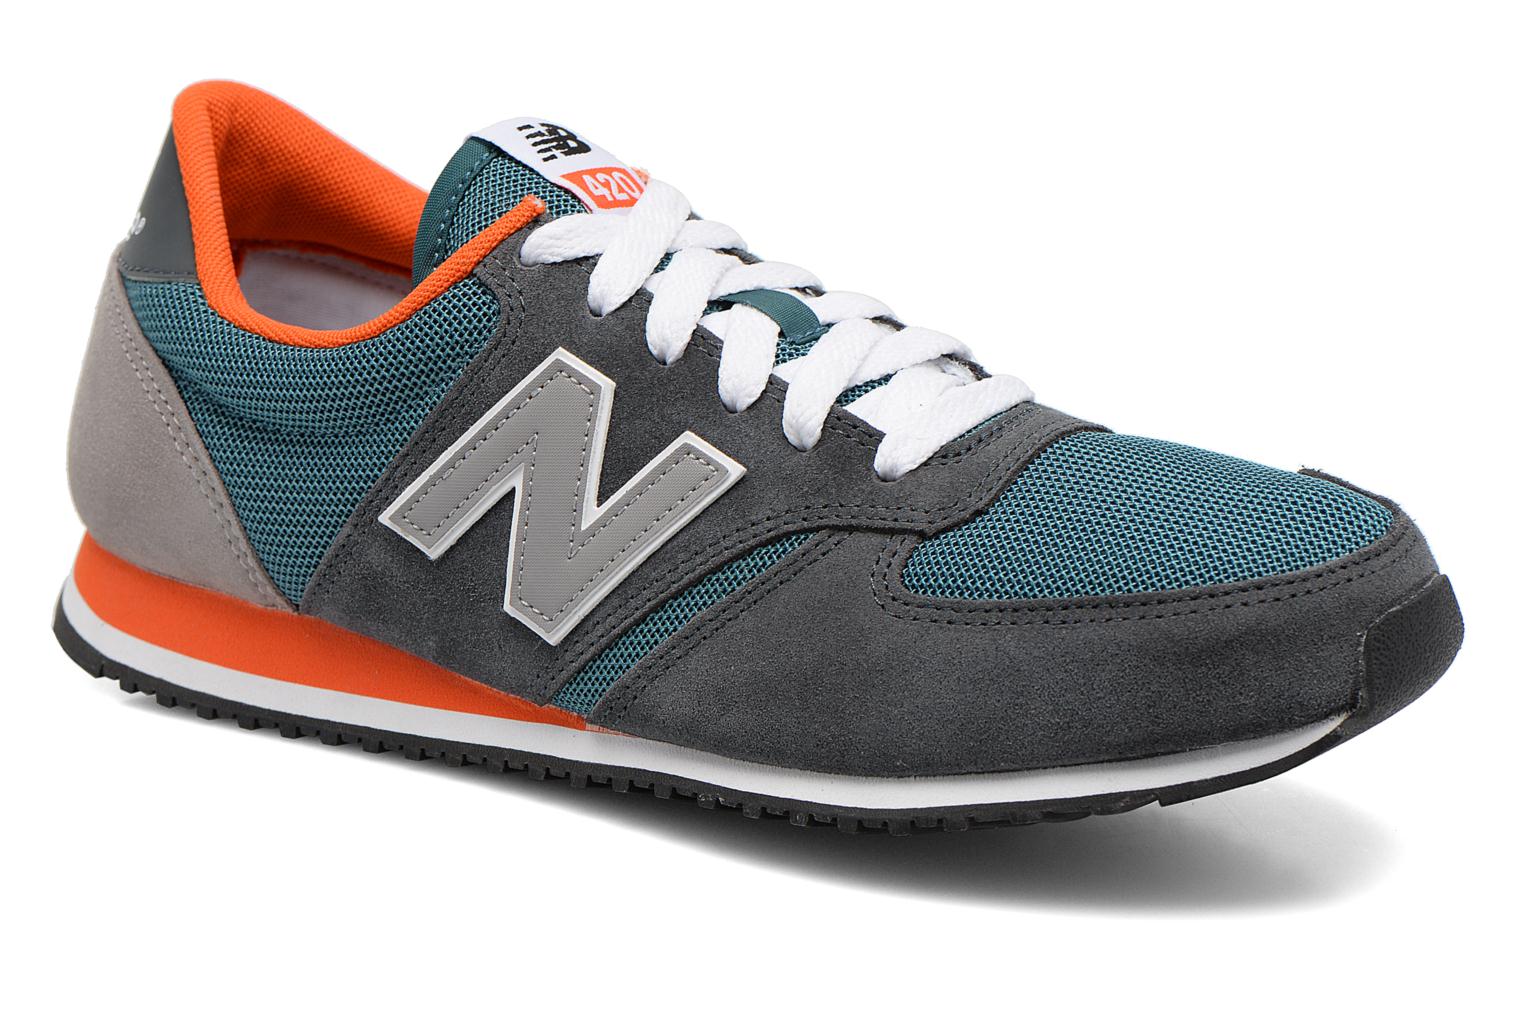 New Balance U420 Trainers in Green at Sarenza.co.uk (222003)